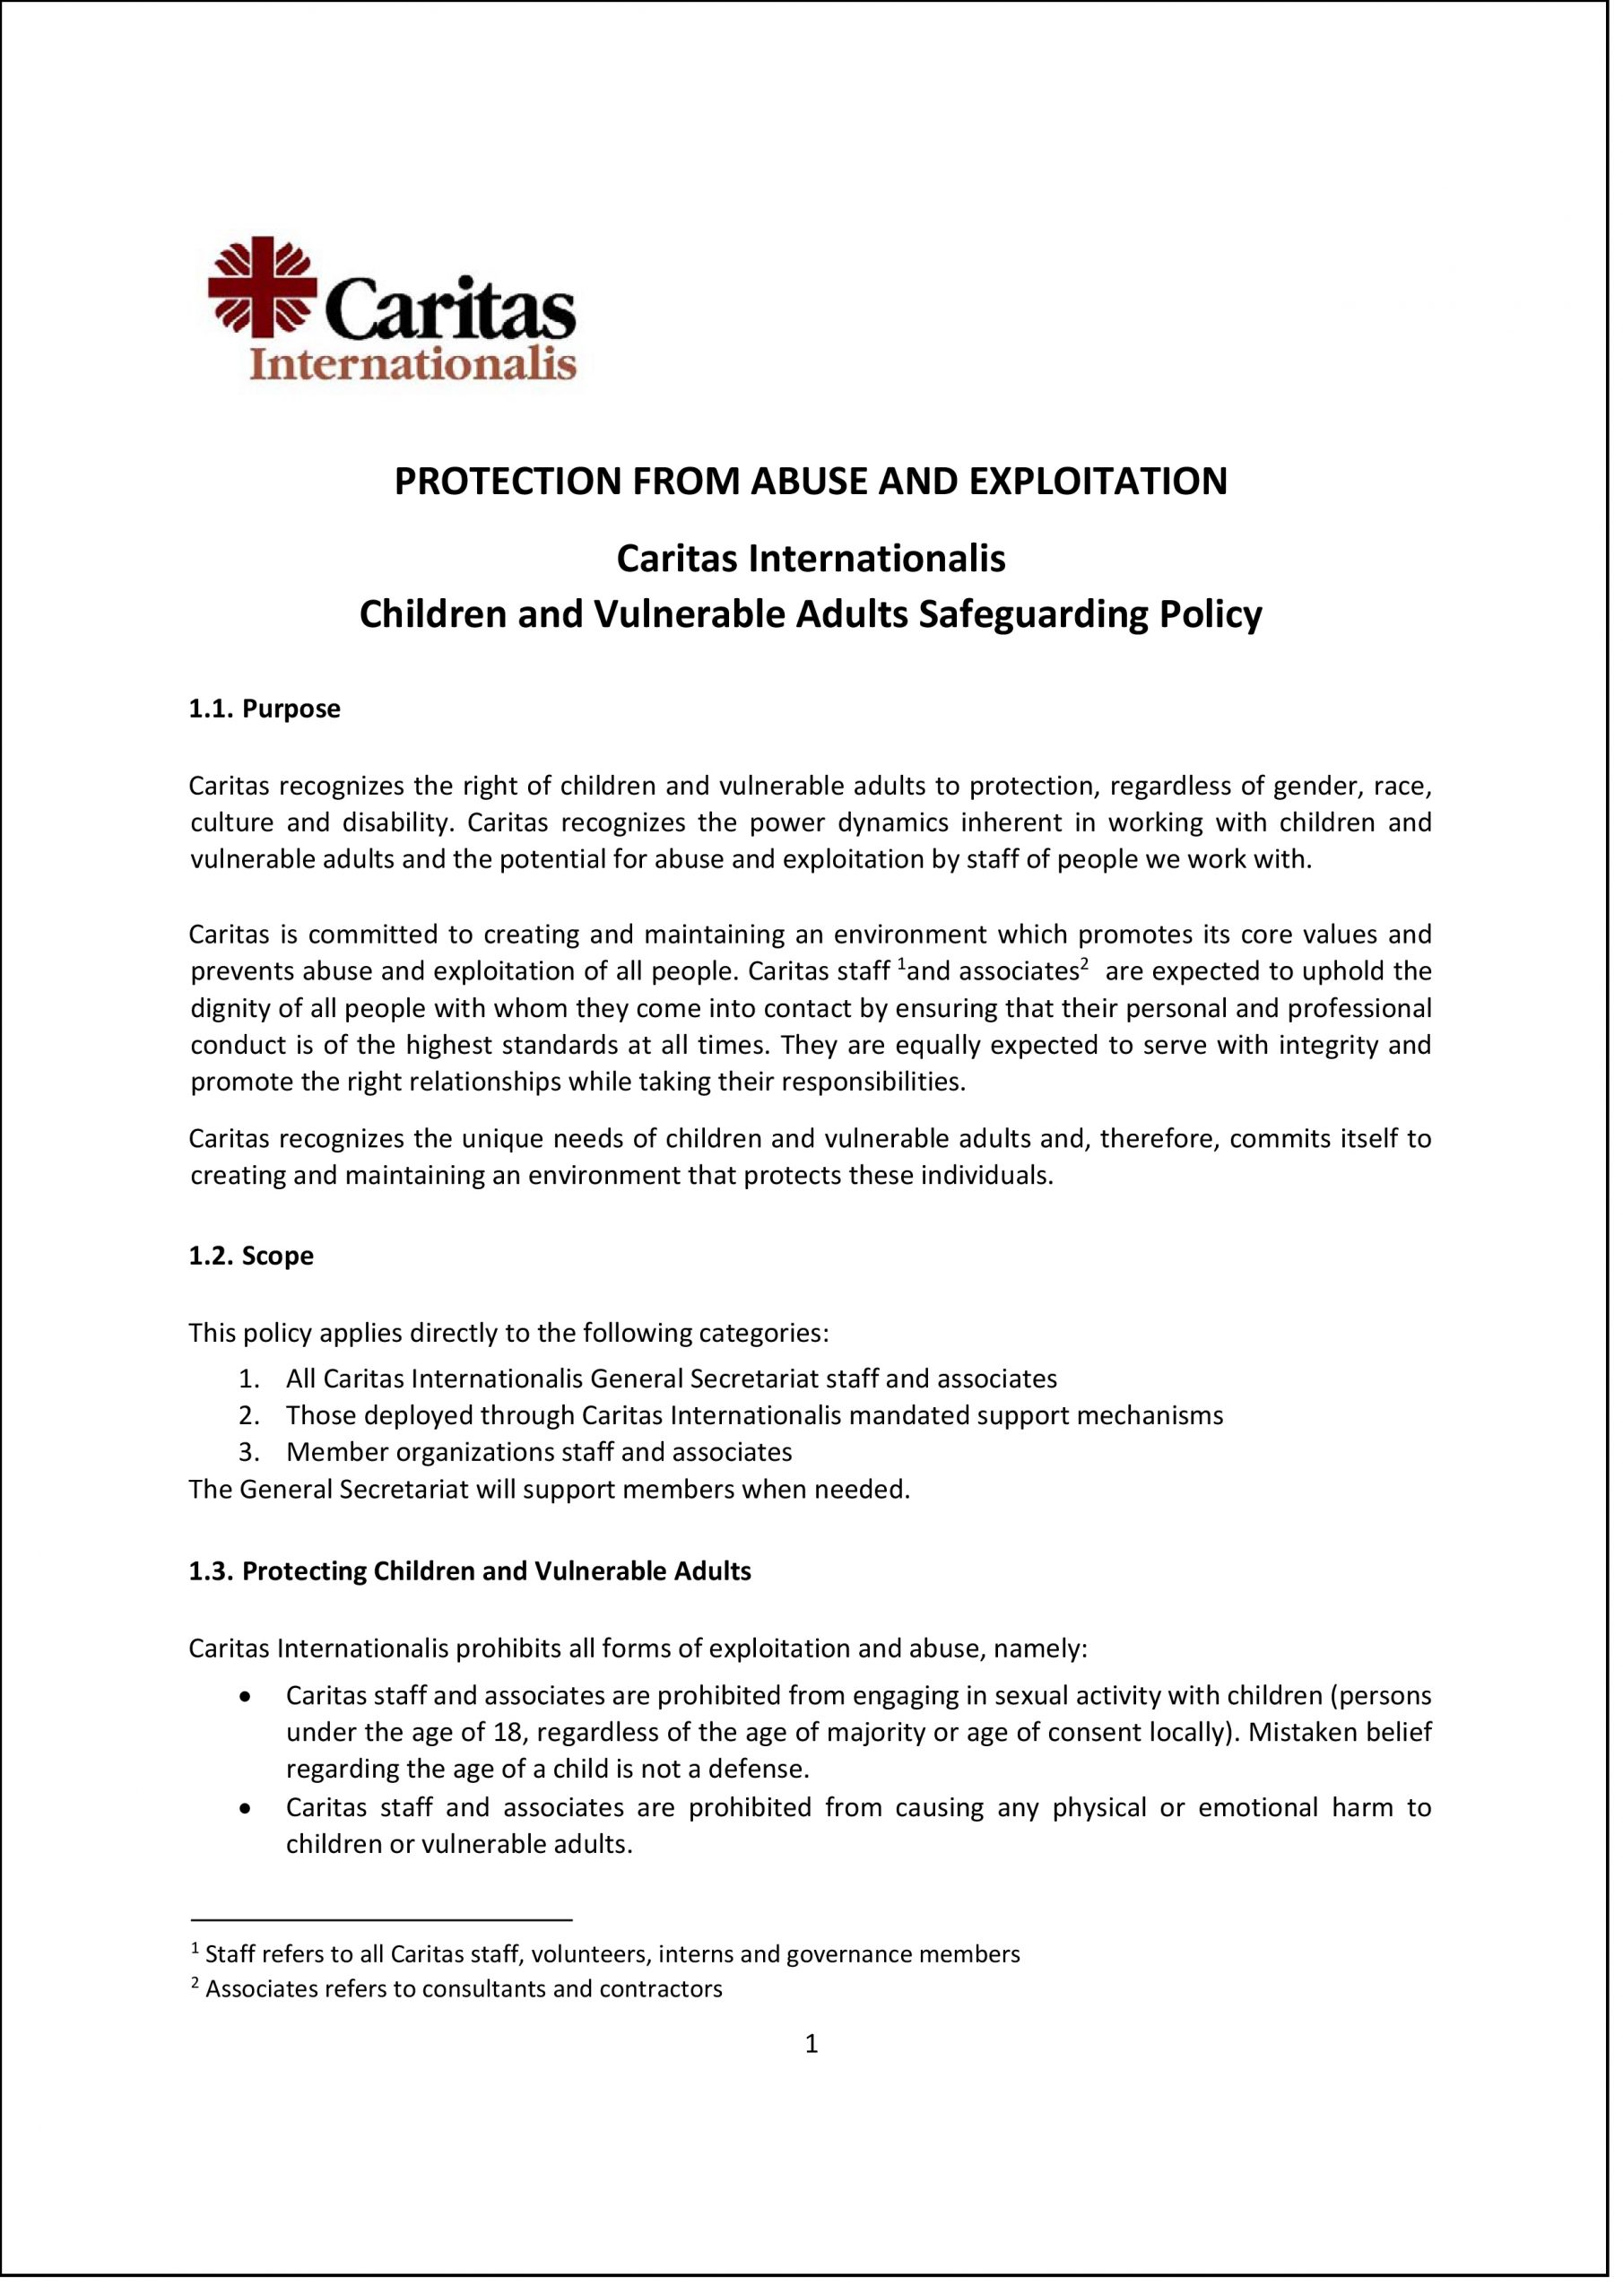 CI Children and Vulnerable Adults Safeguarding Policy